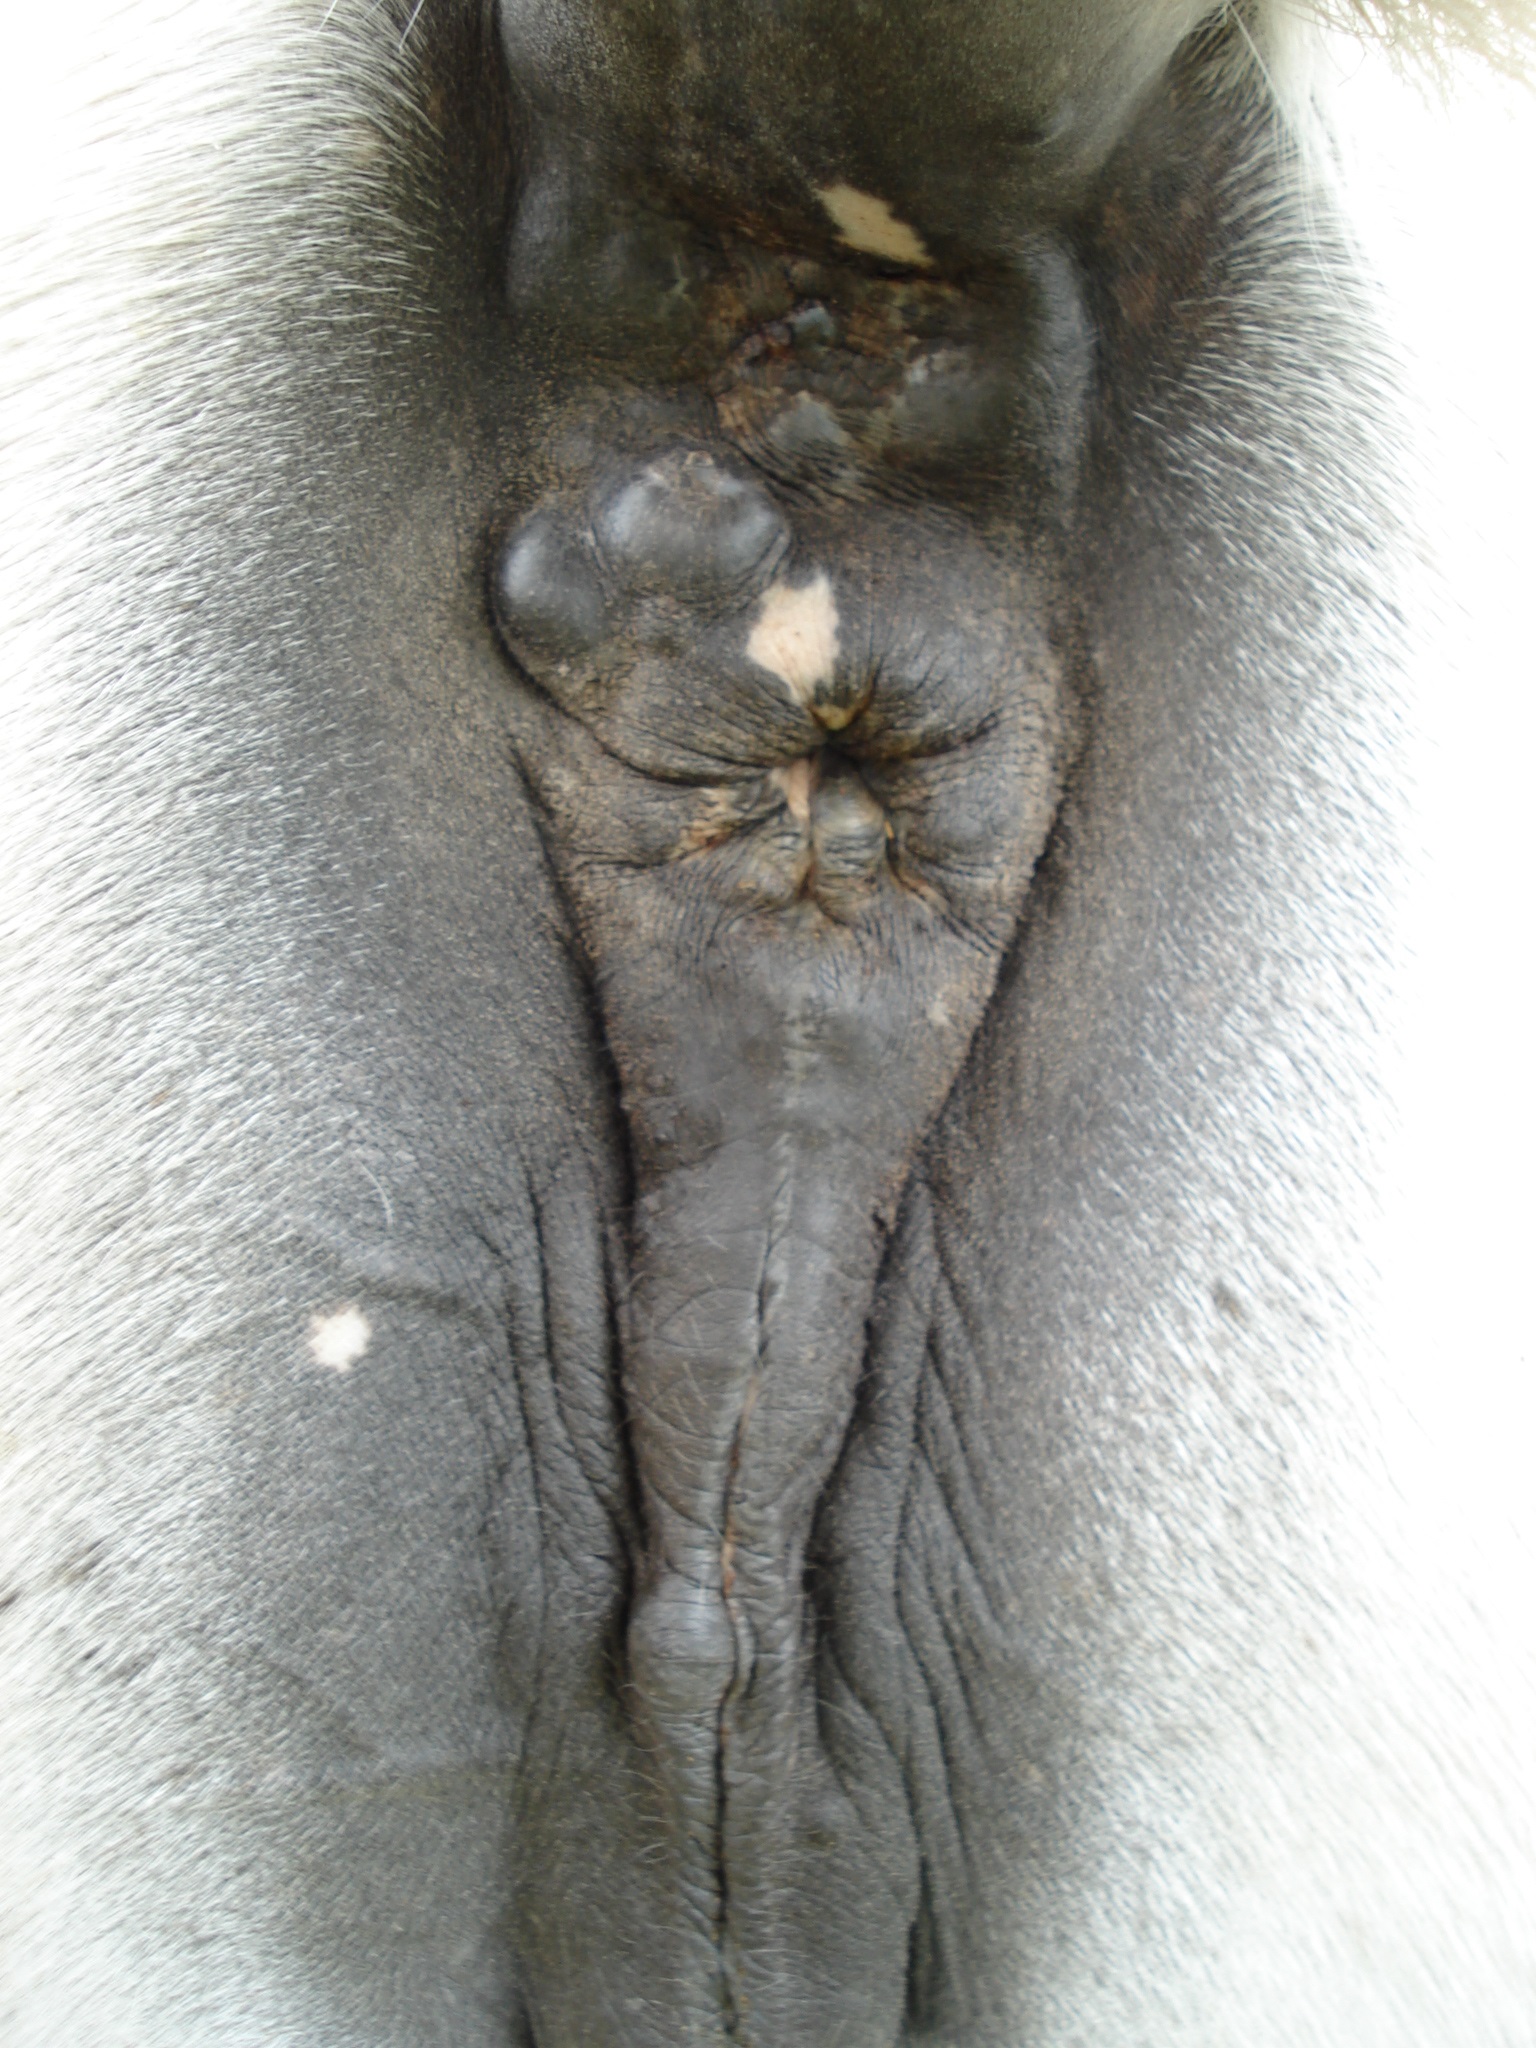 Perineal melanomas; these can become so numerous that they deform the area